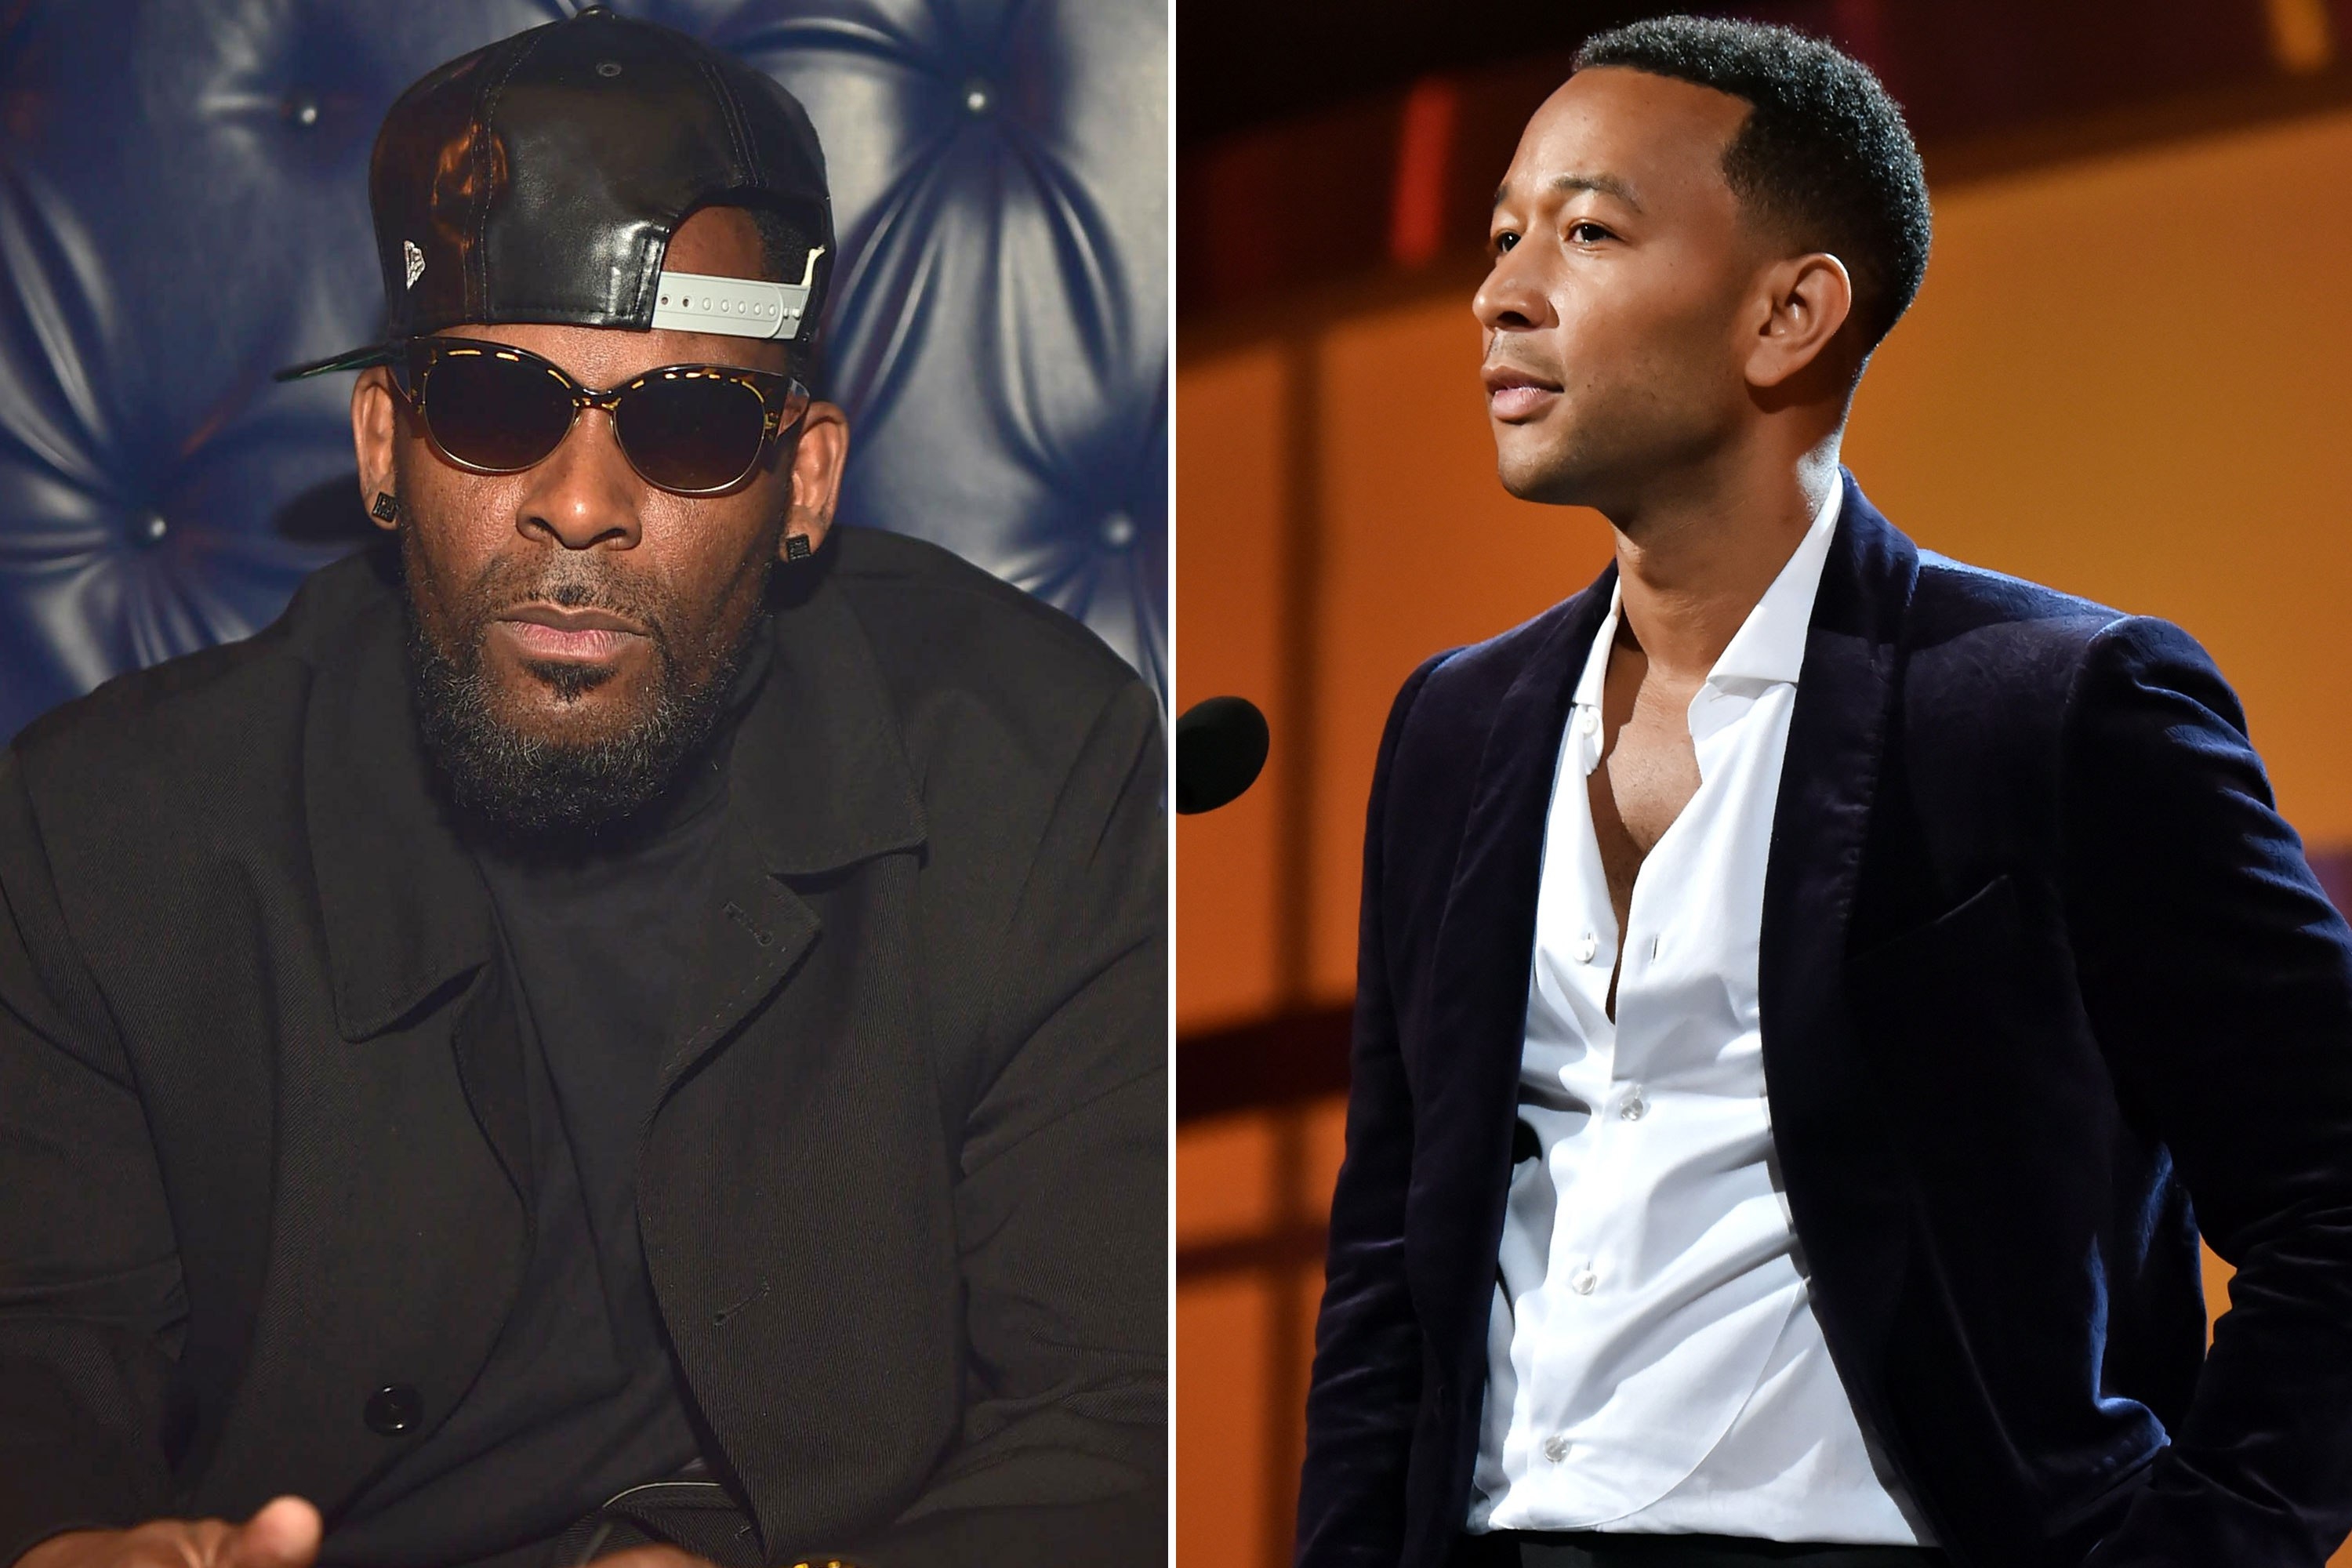 John Legend on appearing in Surviving R Kelly doc: ‘I don’t give a f*** about protecting a serial child rapist’